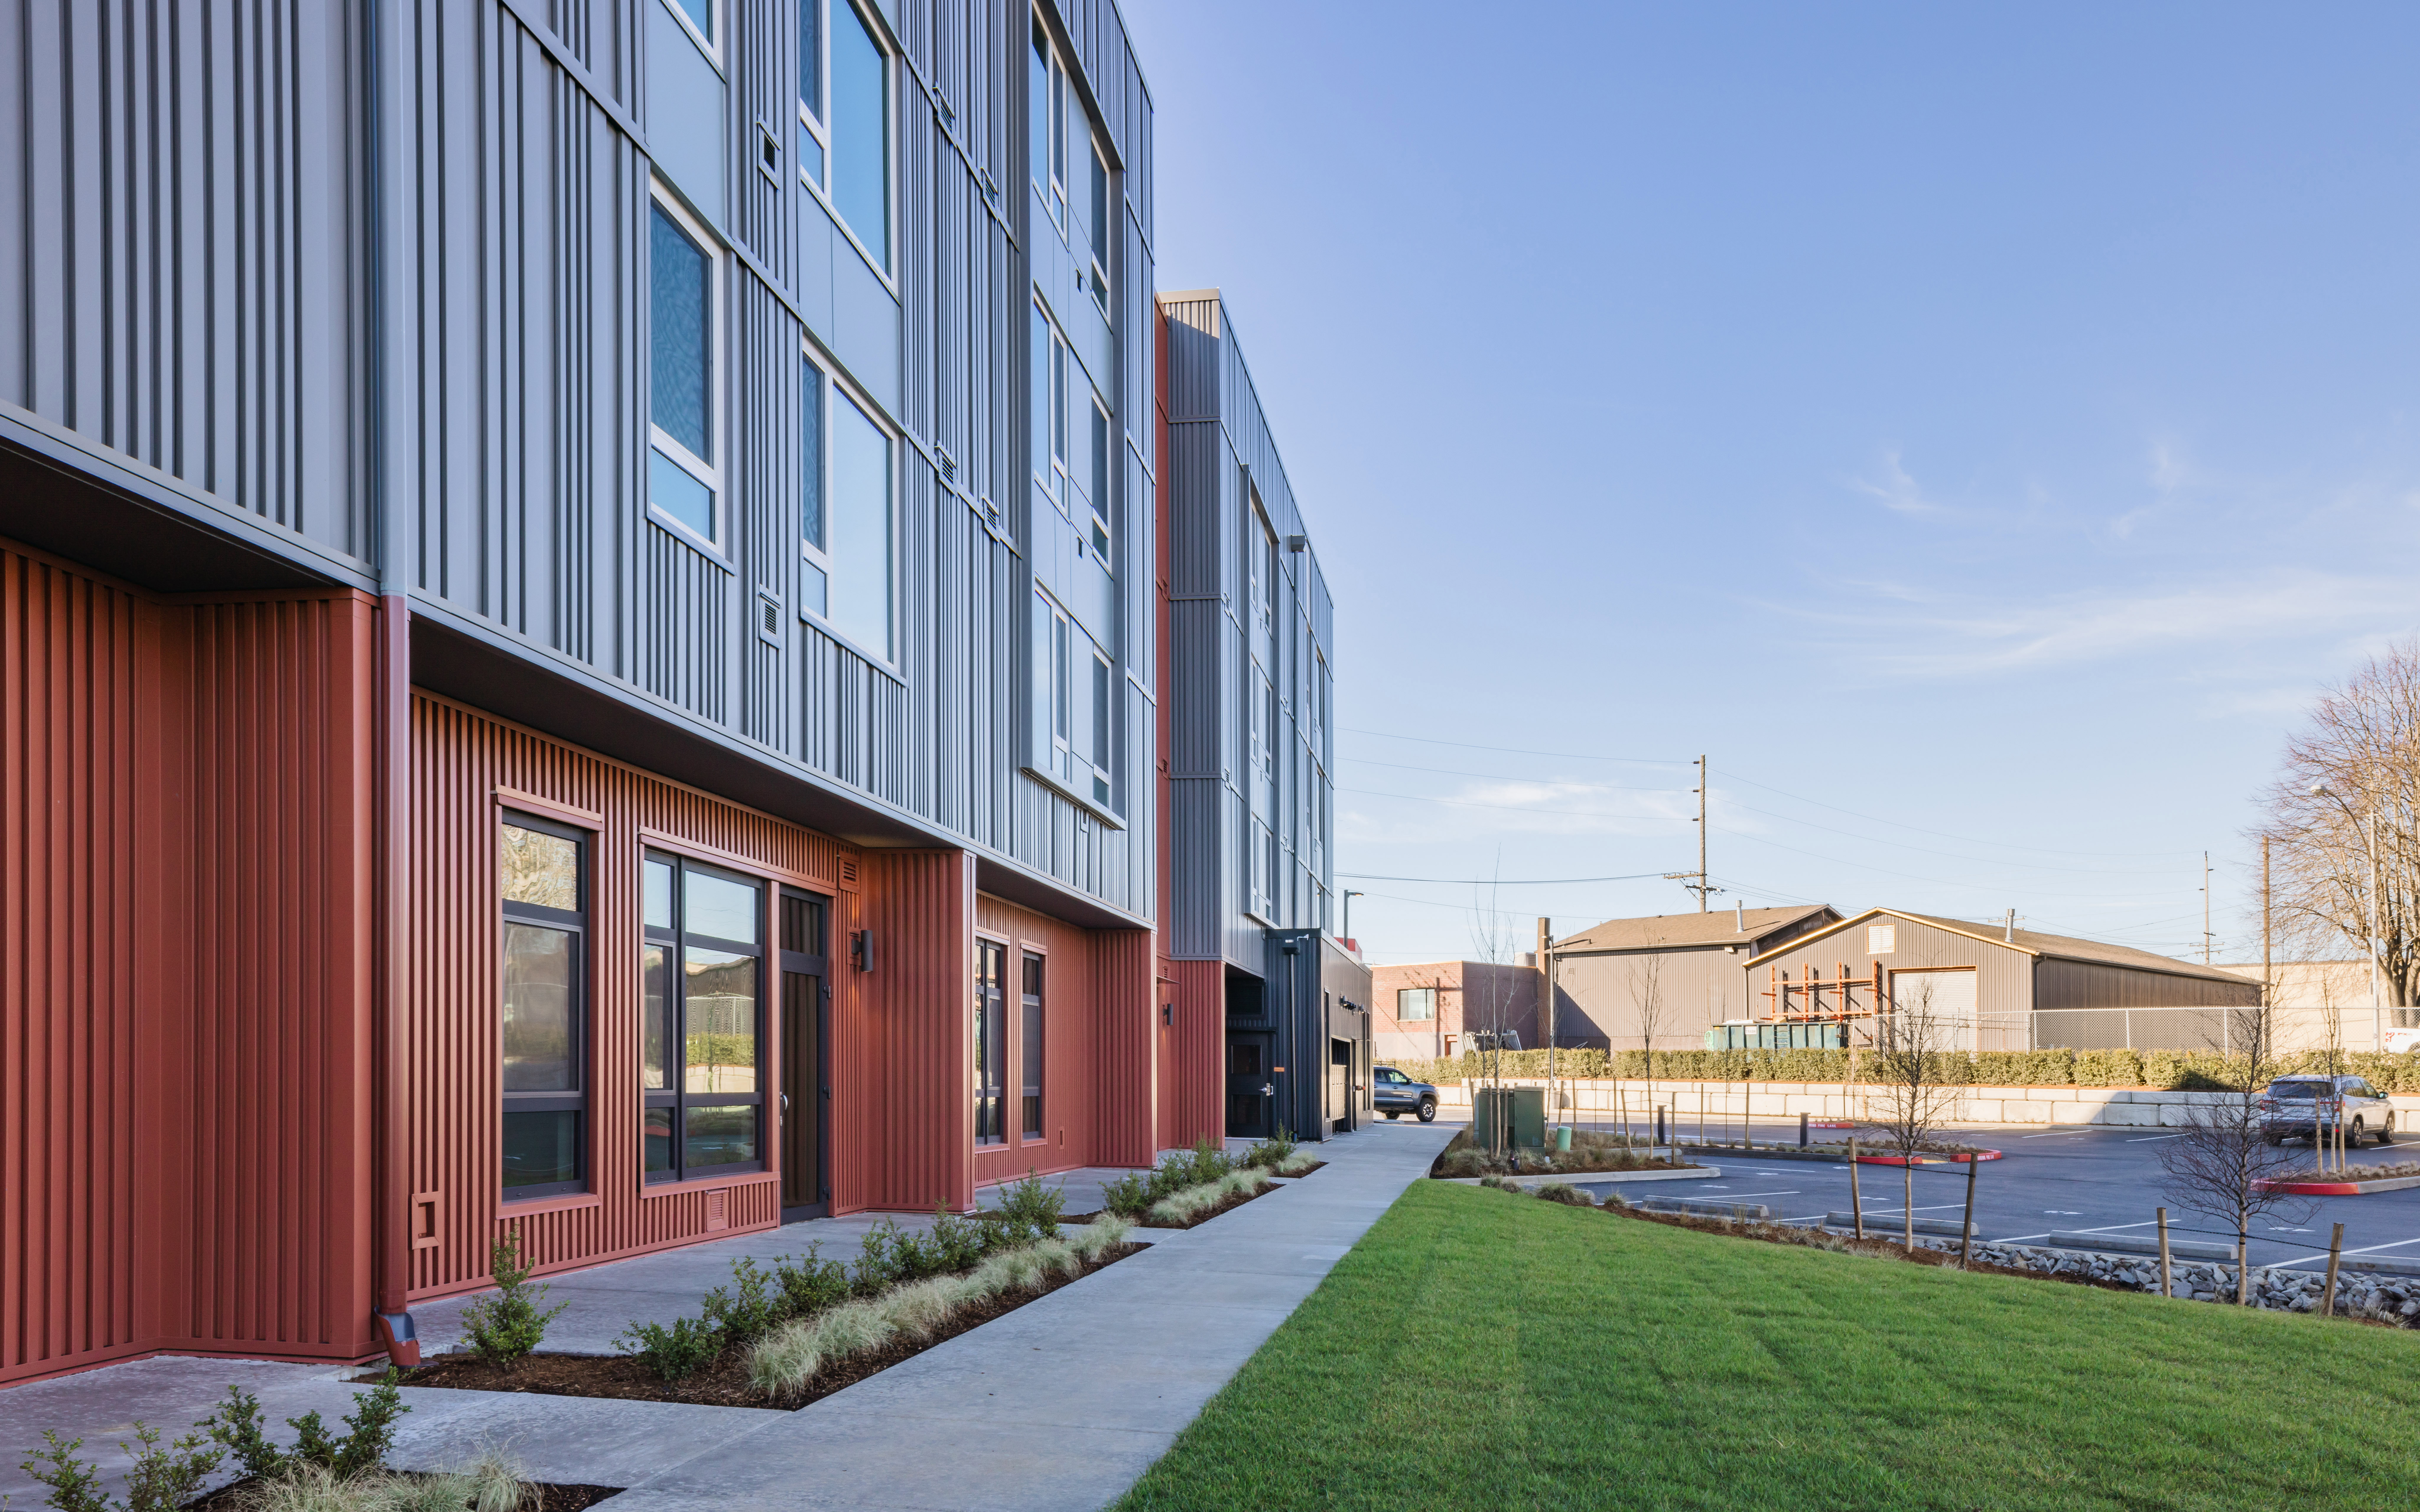 The Jefferson Apartments near the Vancouver, WA Waterfront features AEP Span's metal siding in Flex Series, Span-Lok™ hp and Box Rib™.